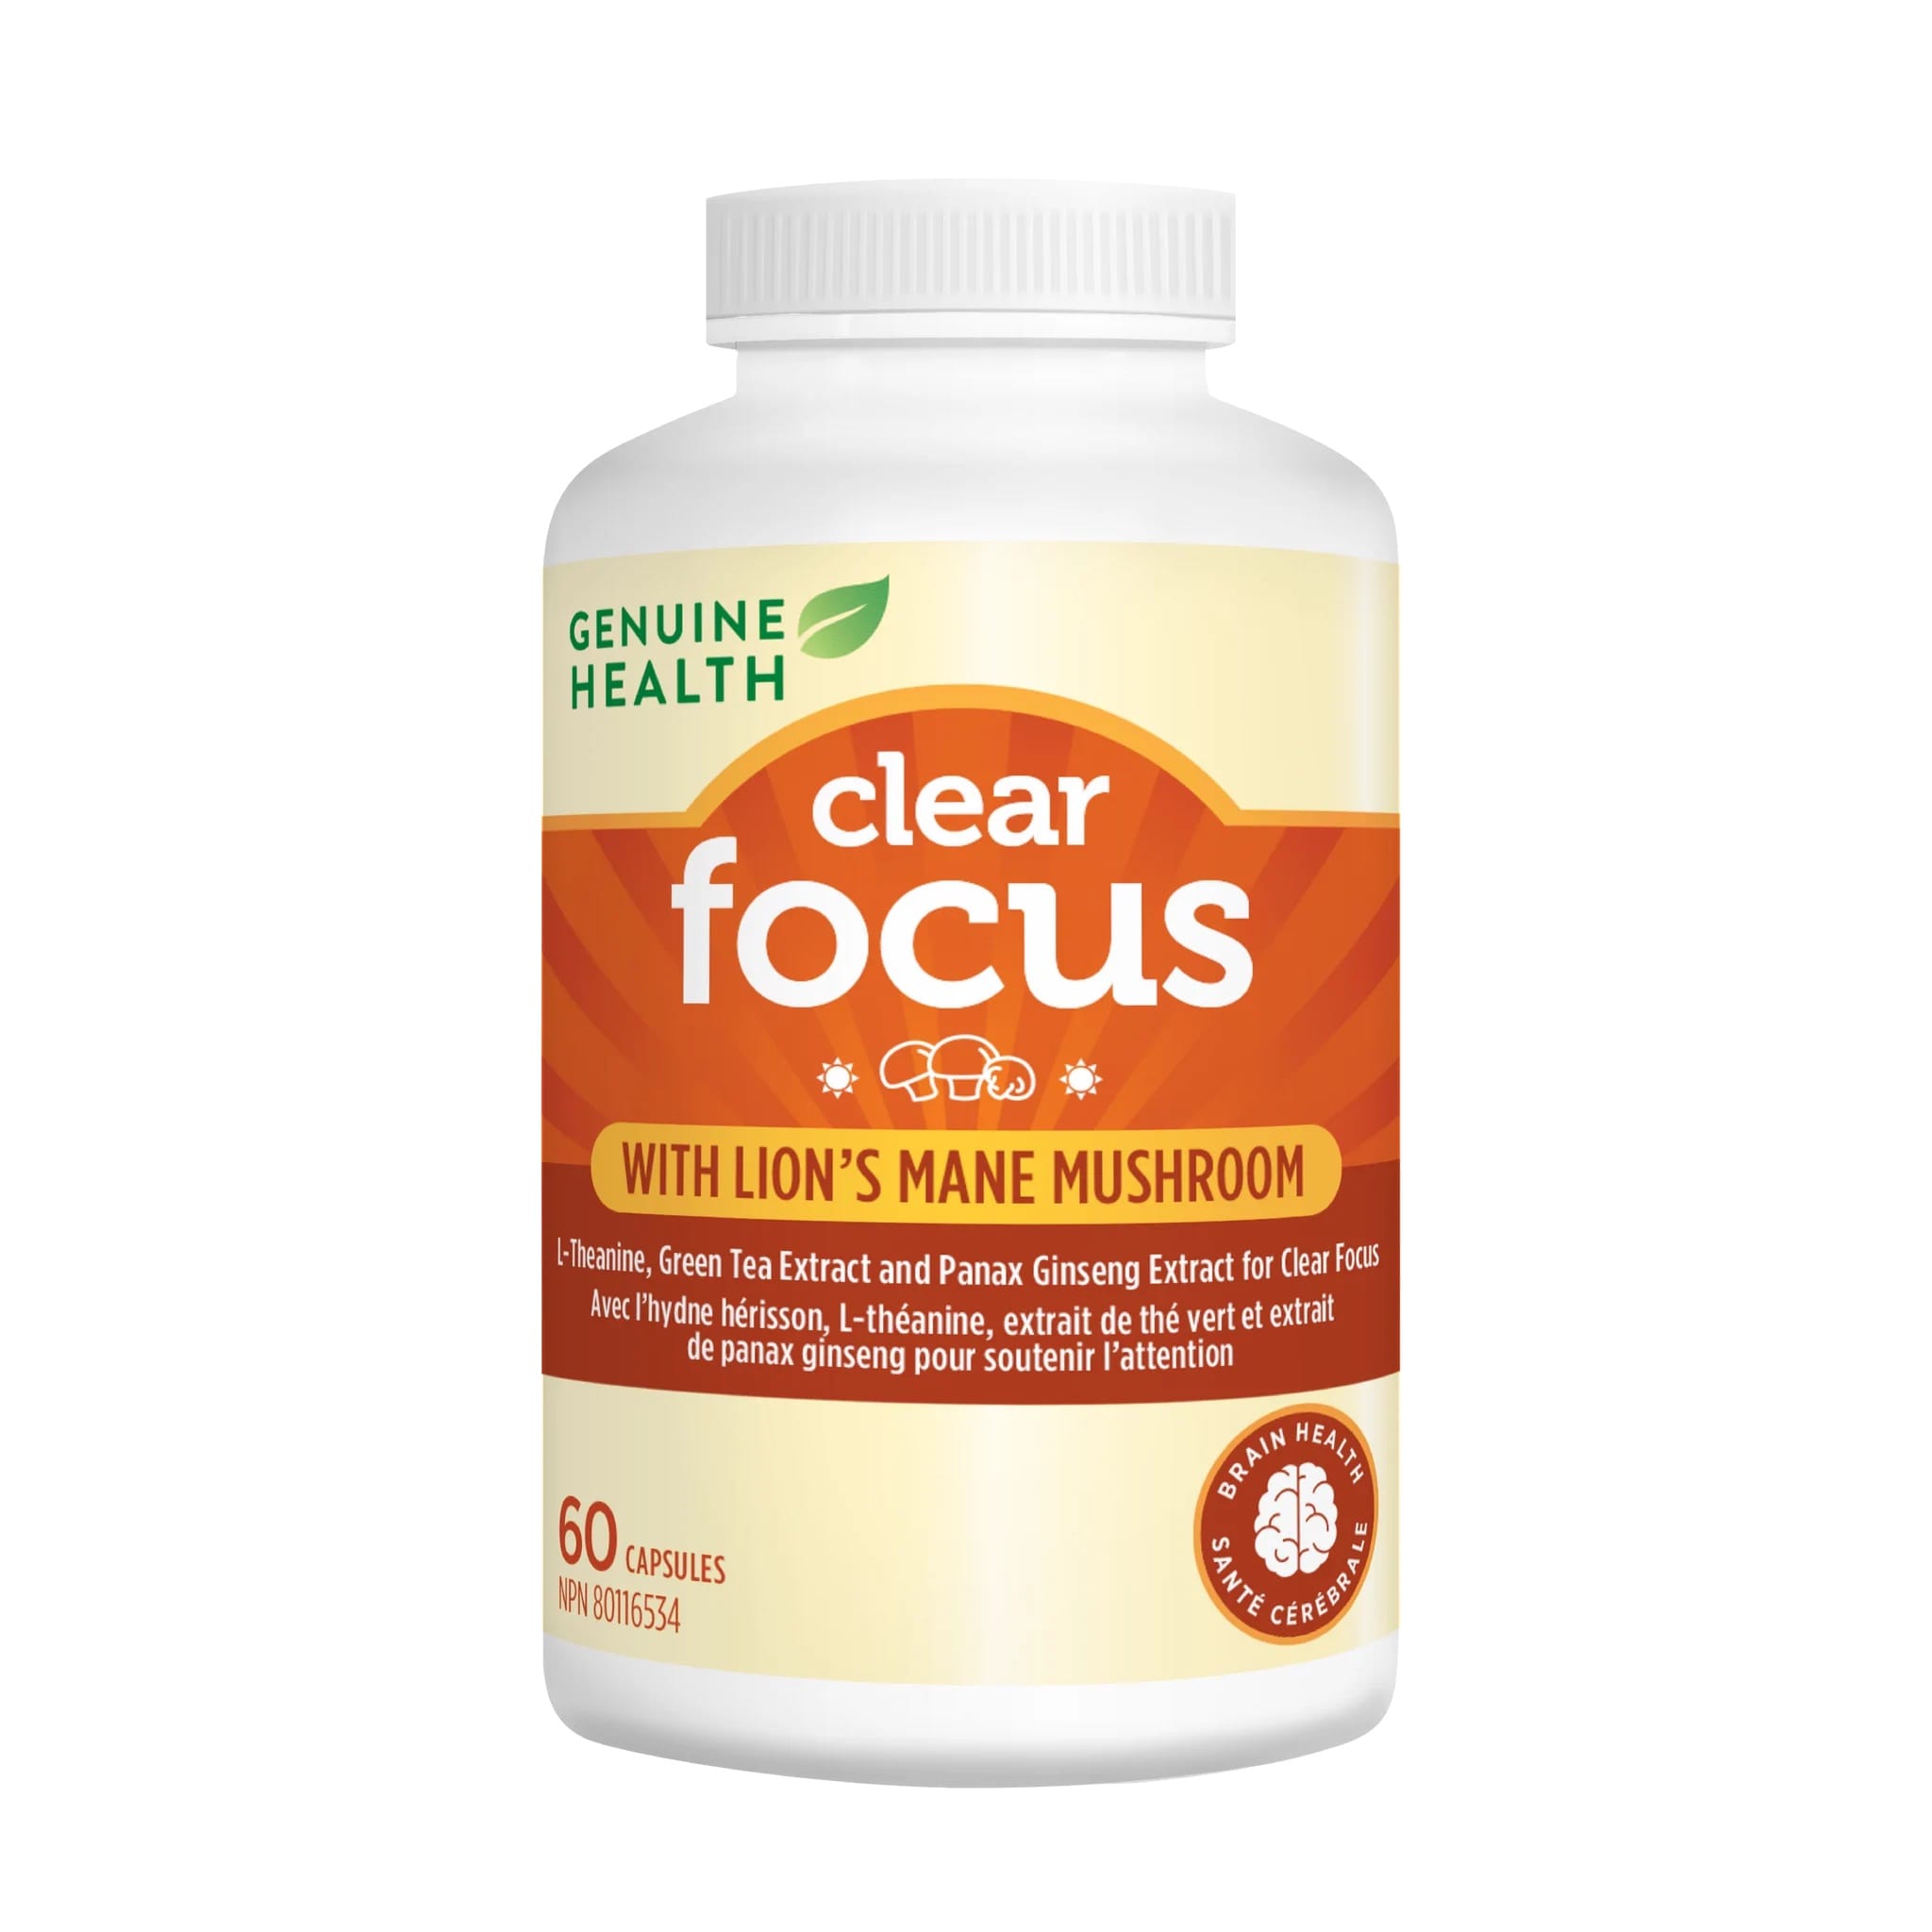 clear focus supplement by Genuine Health